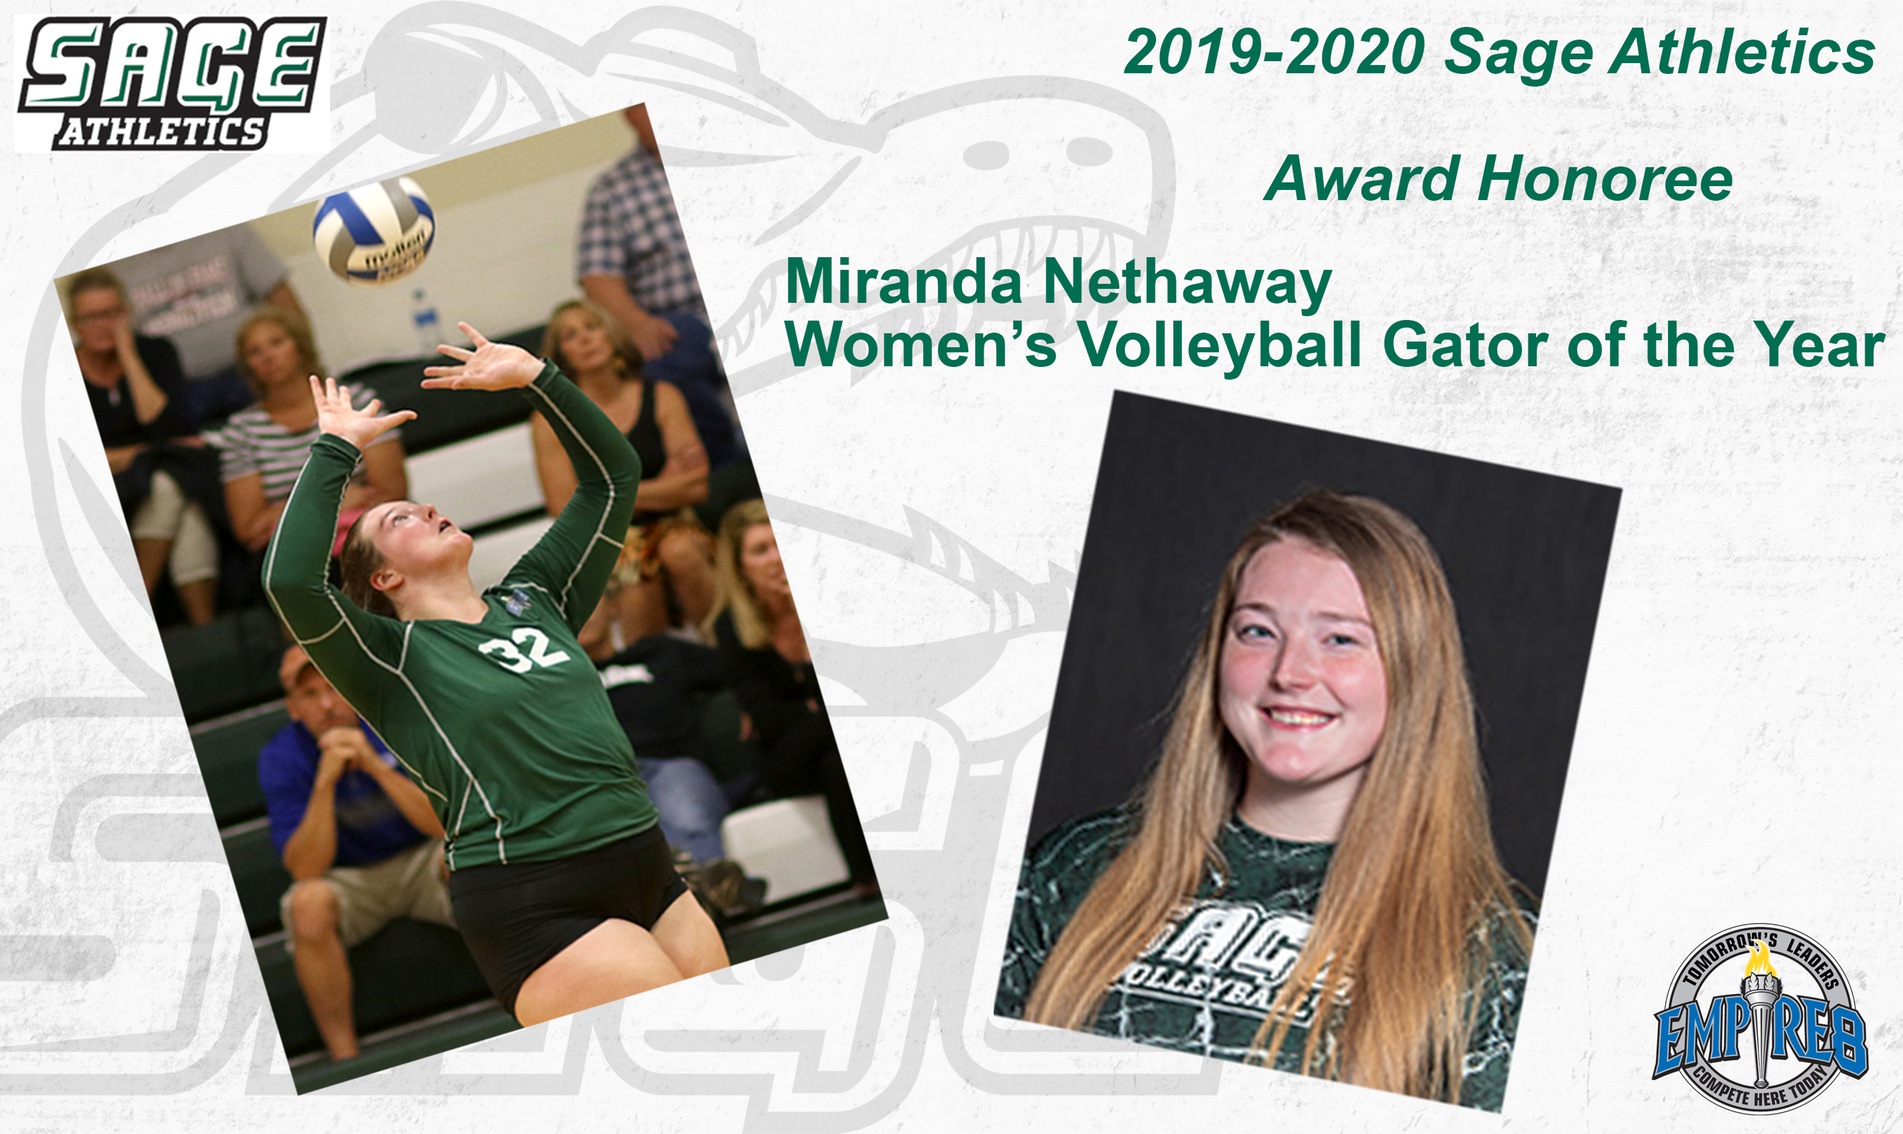 Miranda Nethaway selected as Women's Volleyball Gator of the Year